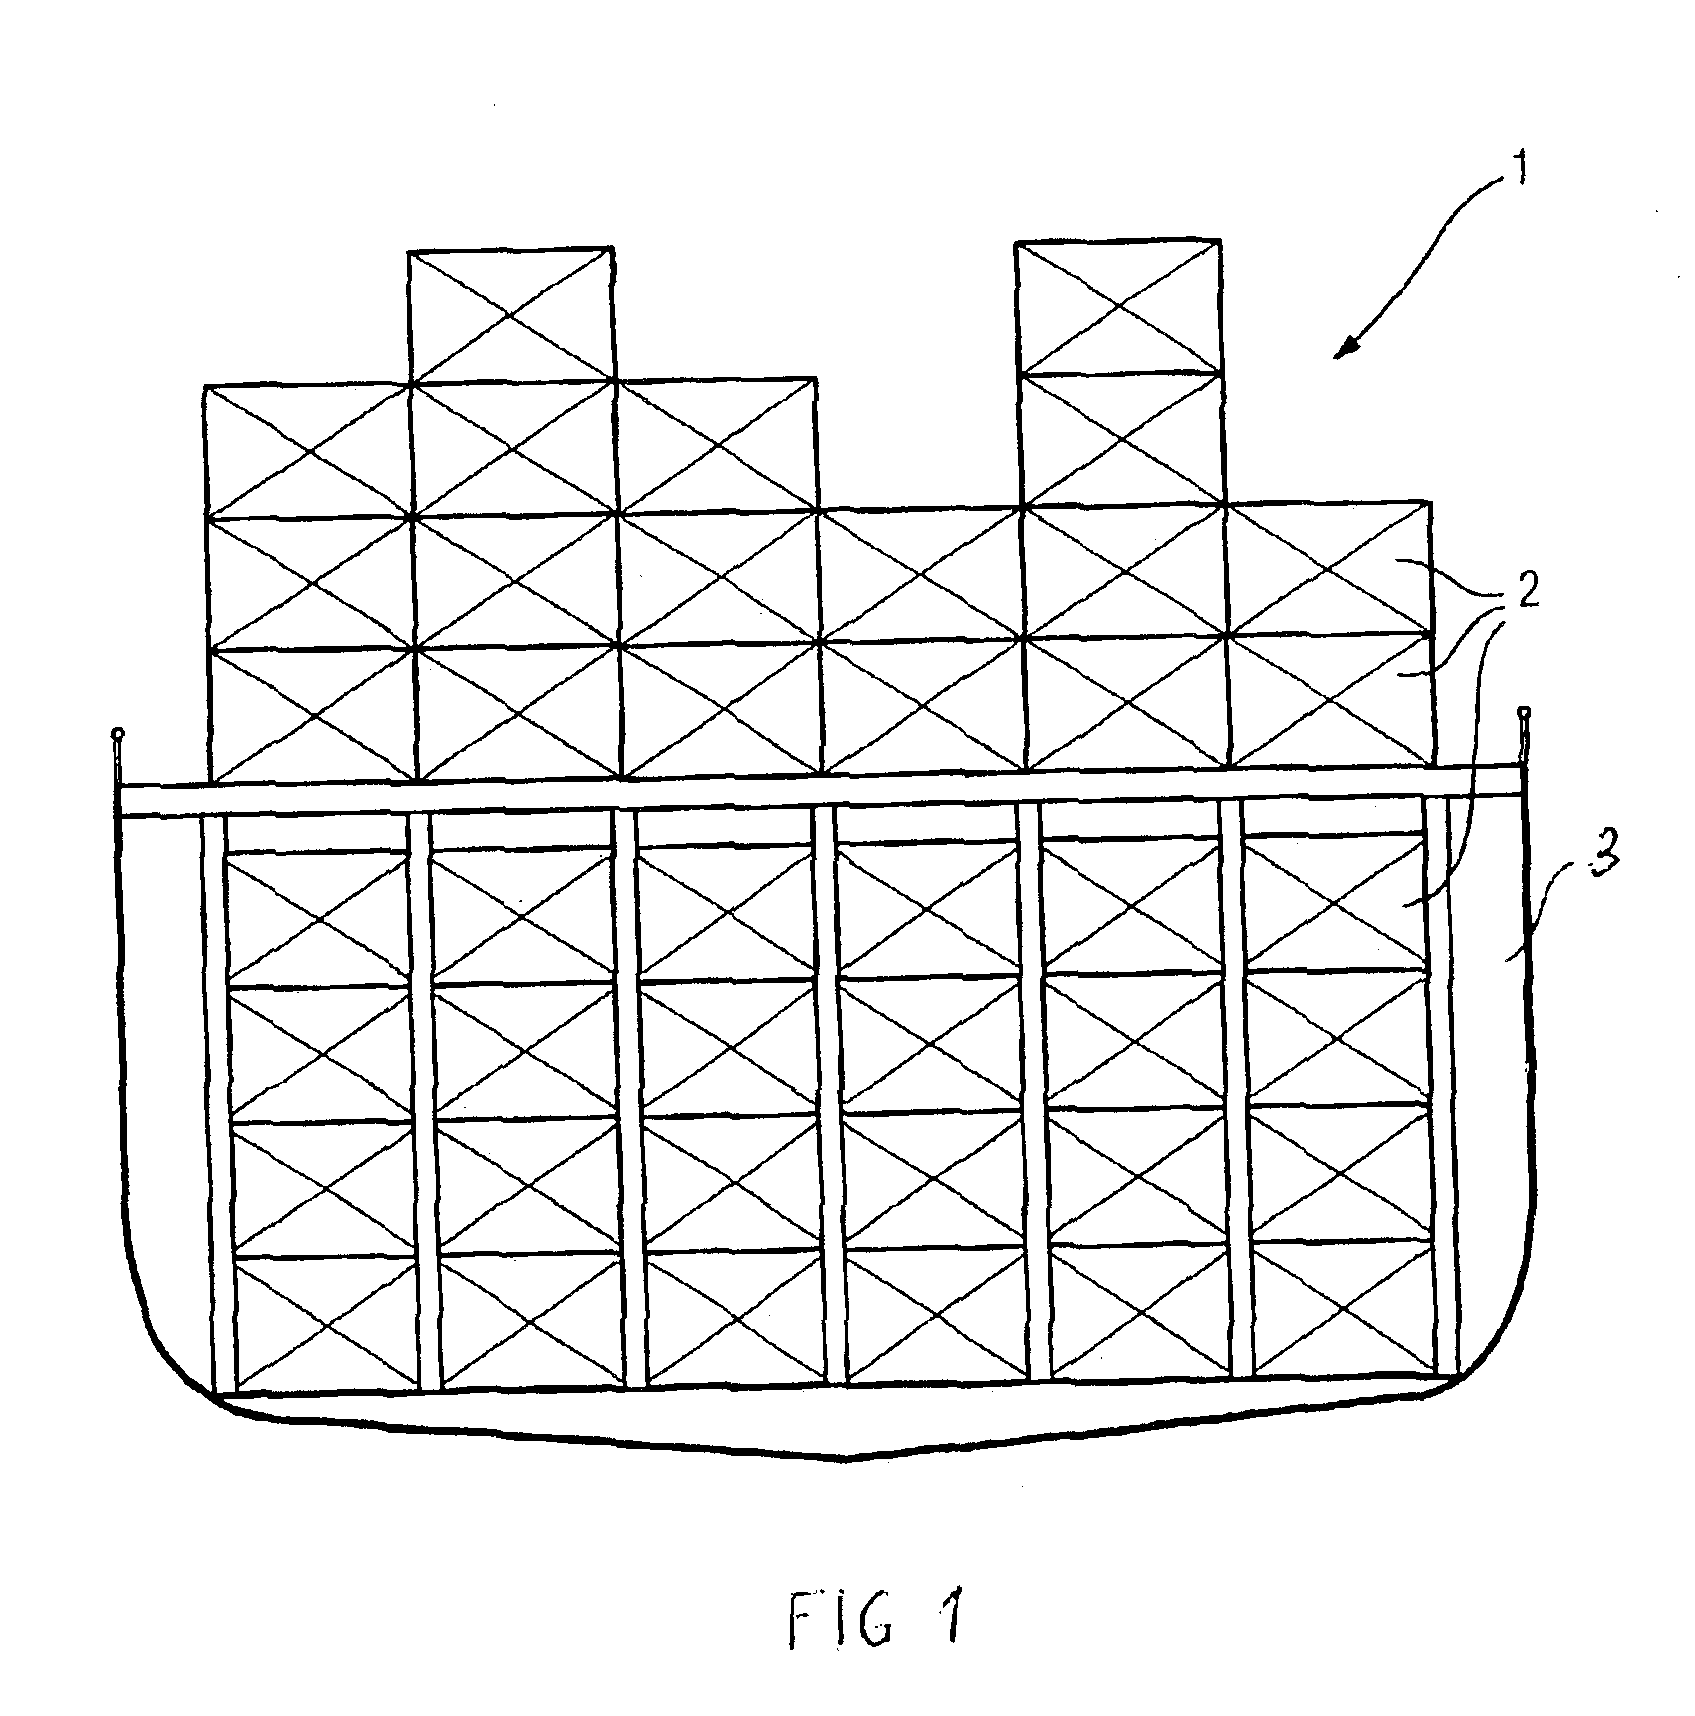 Method of automating a loading and unloading of container ships in container terminals, and crane automation system